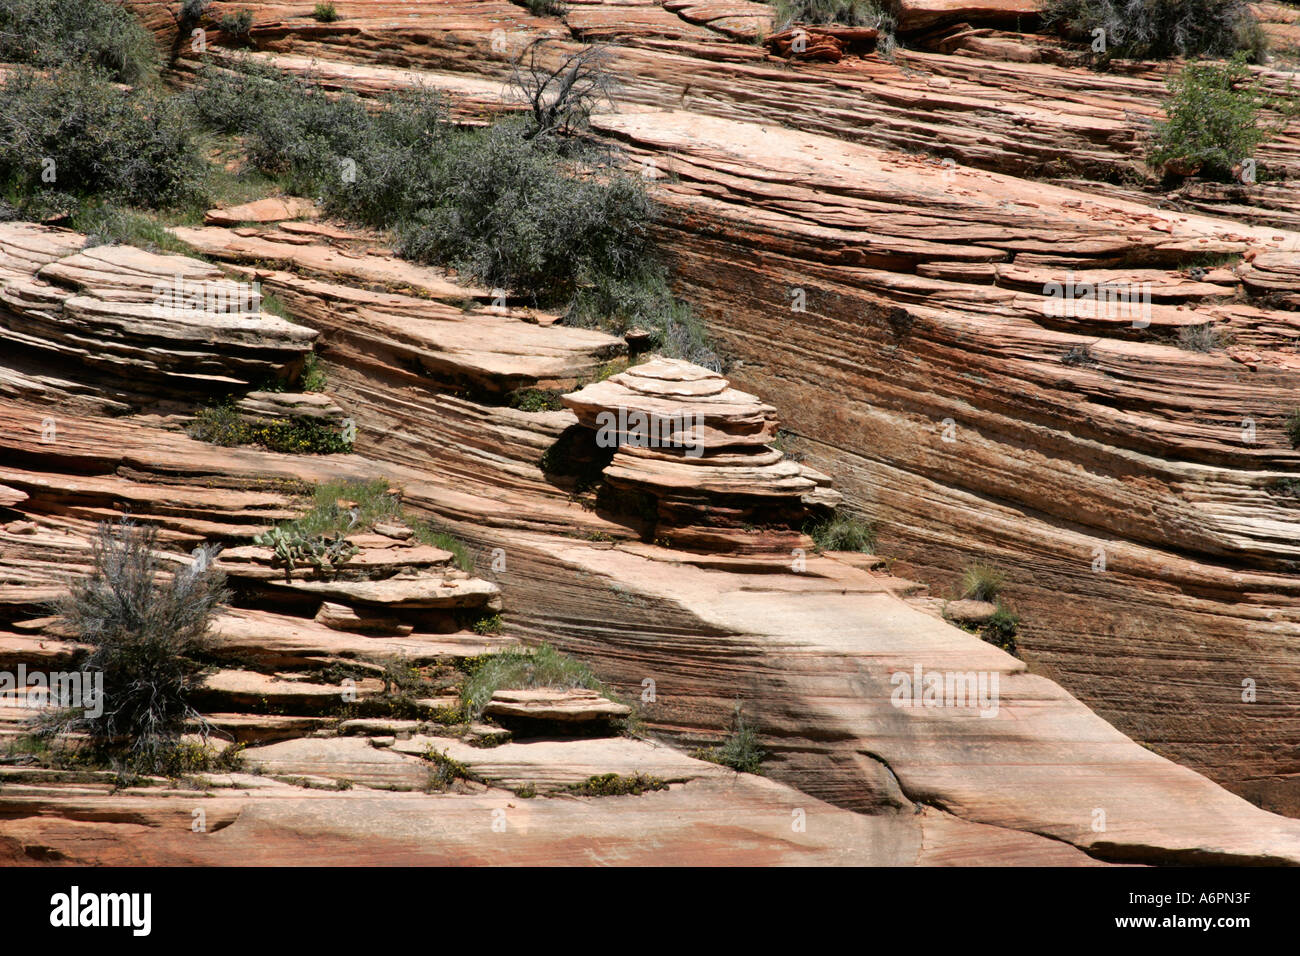 Layers of Sandstone, east side of Zion National Park, Utah, USA Stock Photo